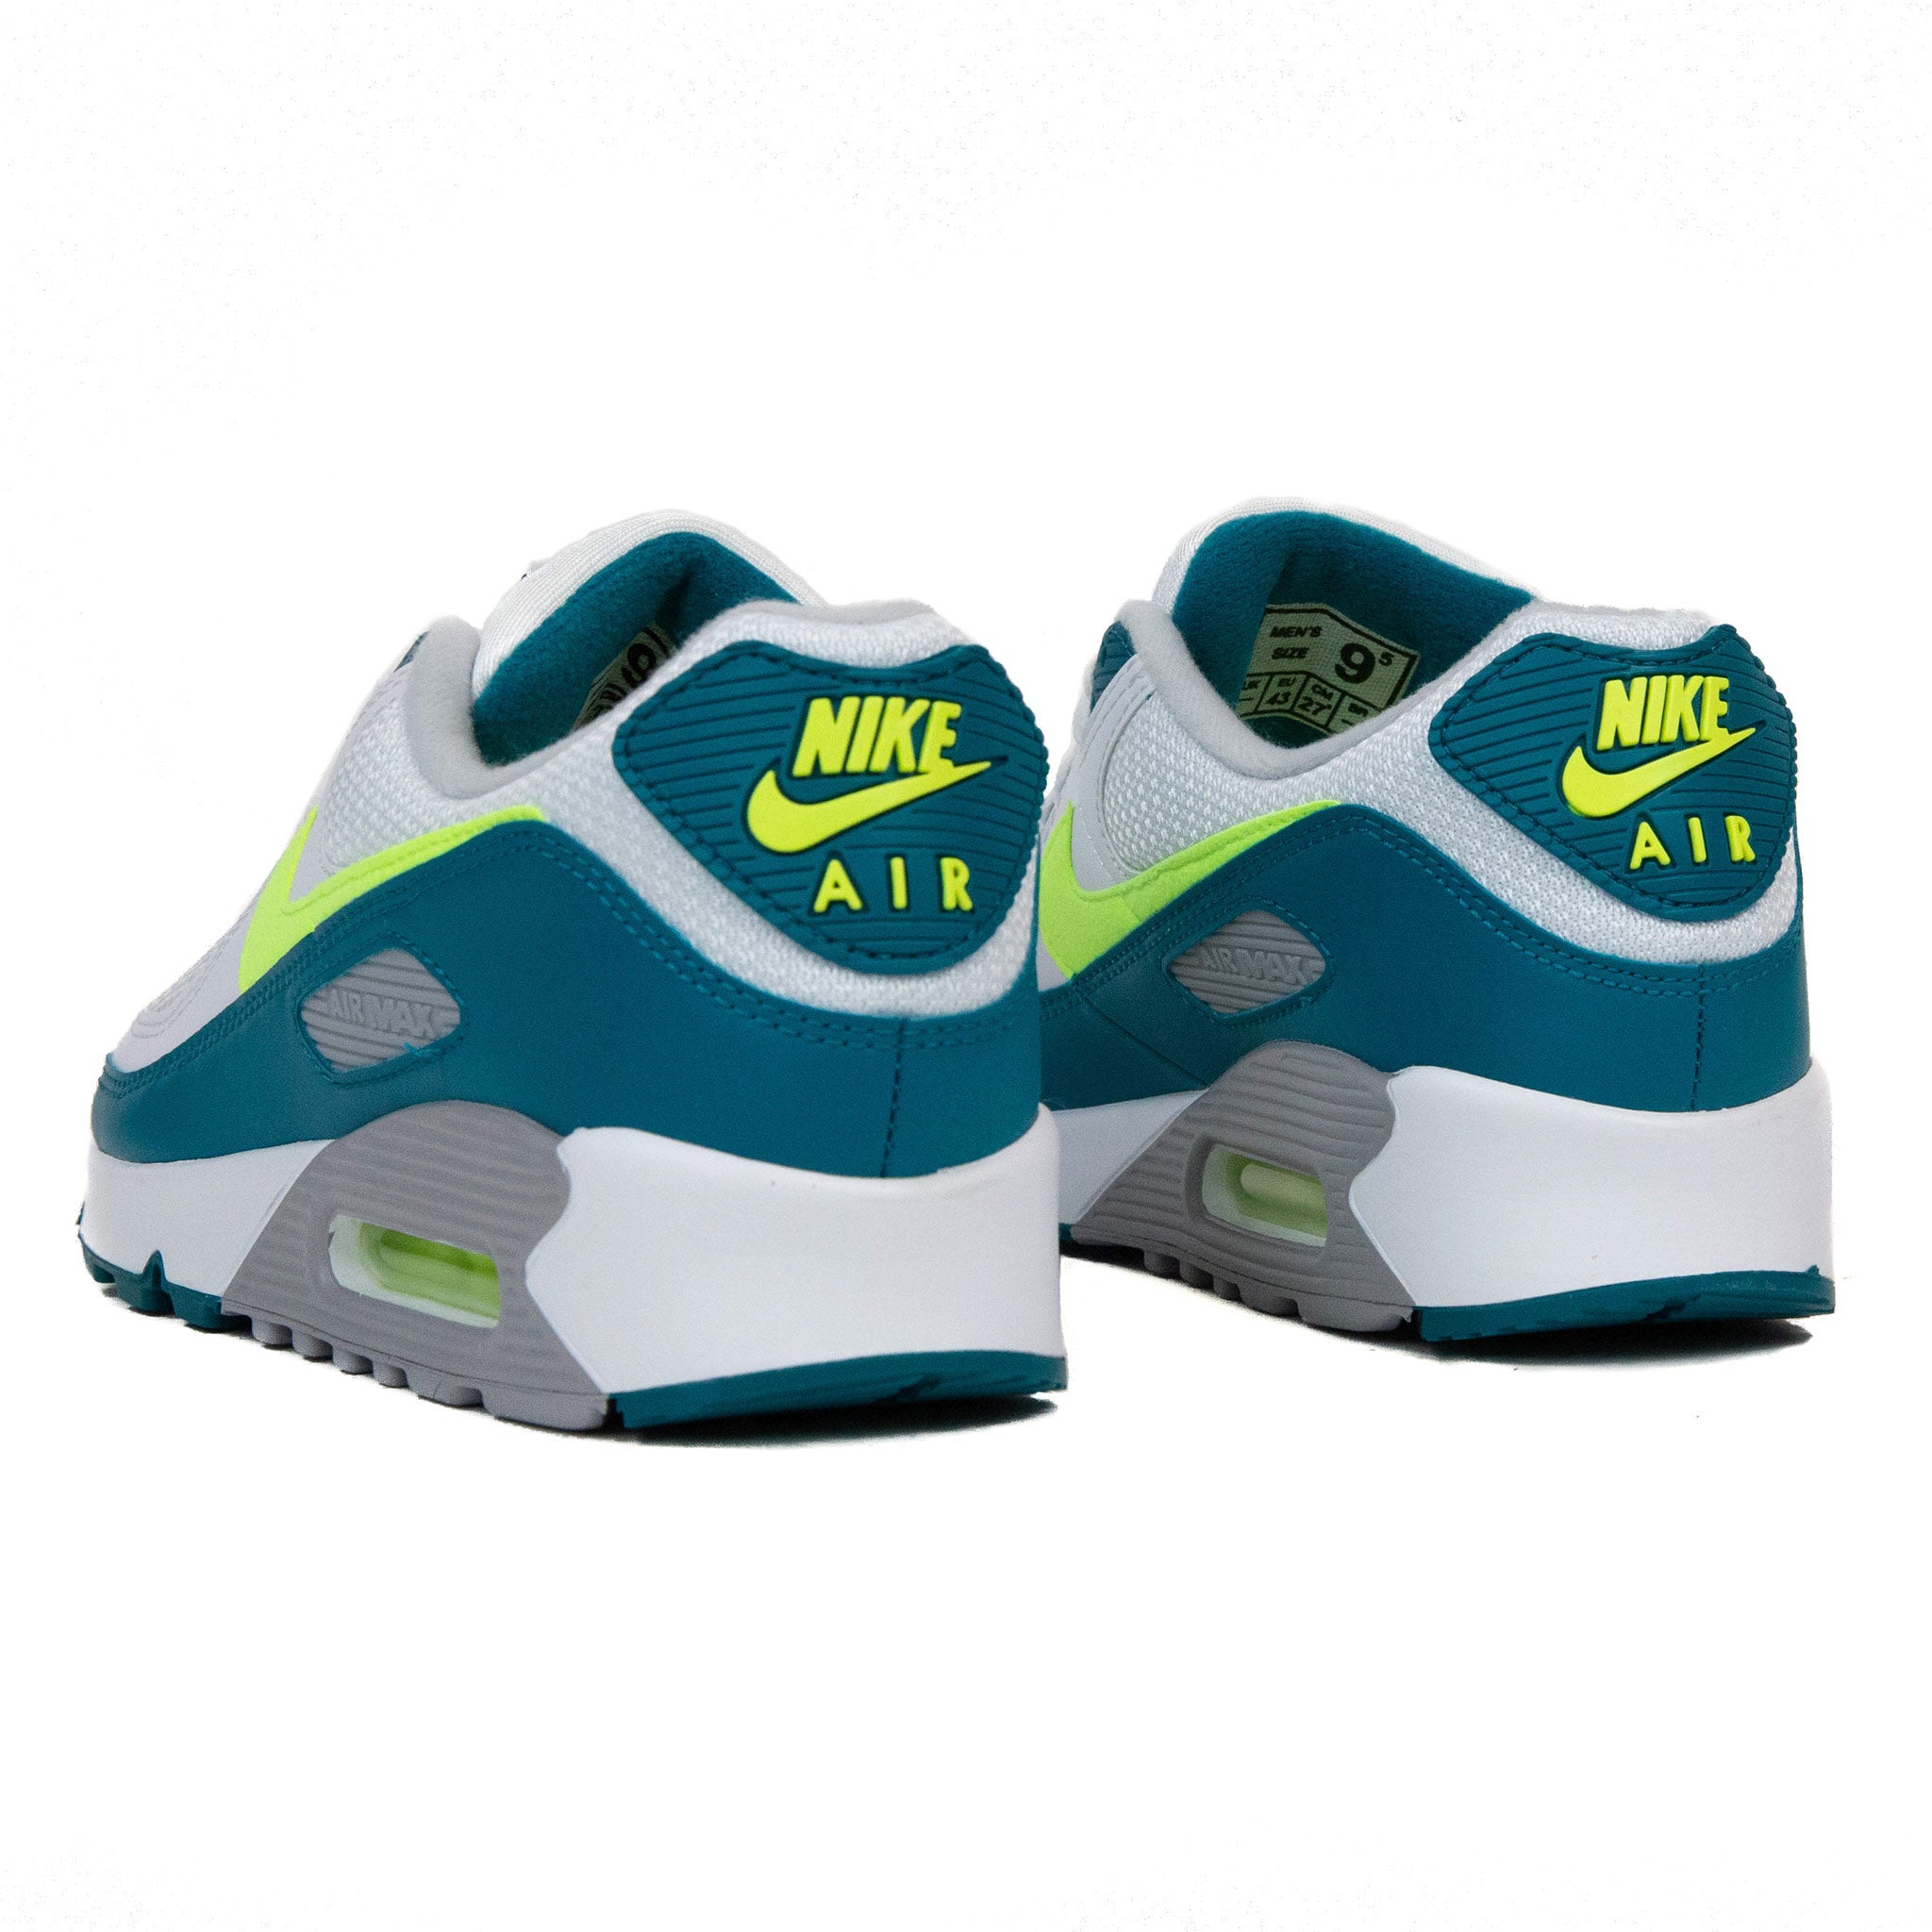 NIKE/エアマックスAIR MAX3/Hot Lime | www.sportique.nu